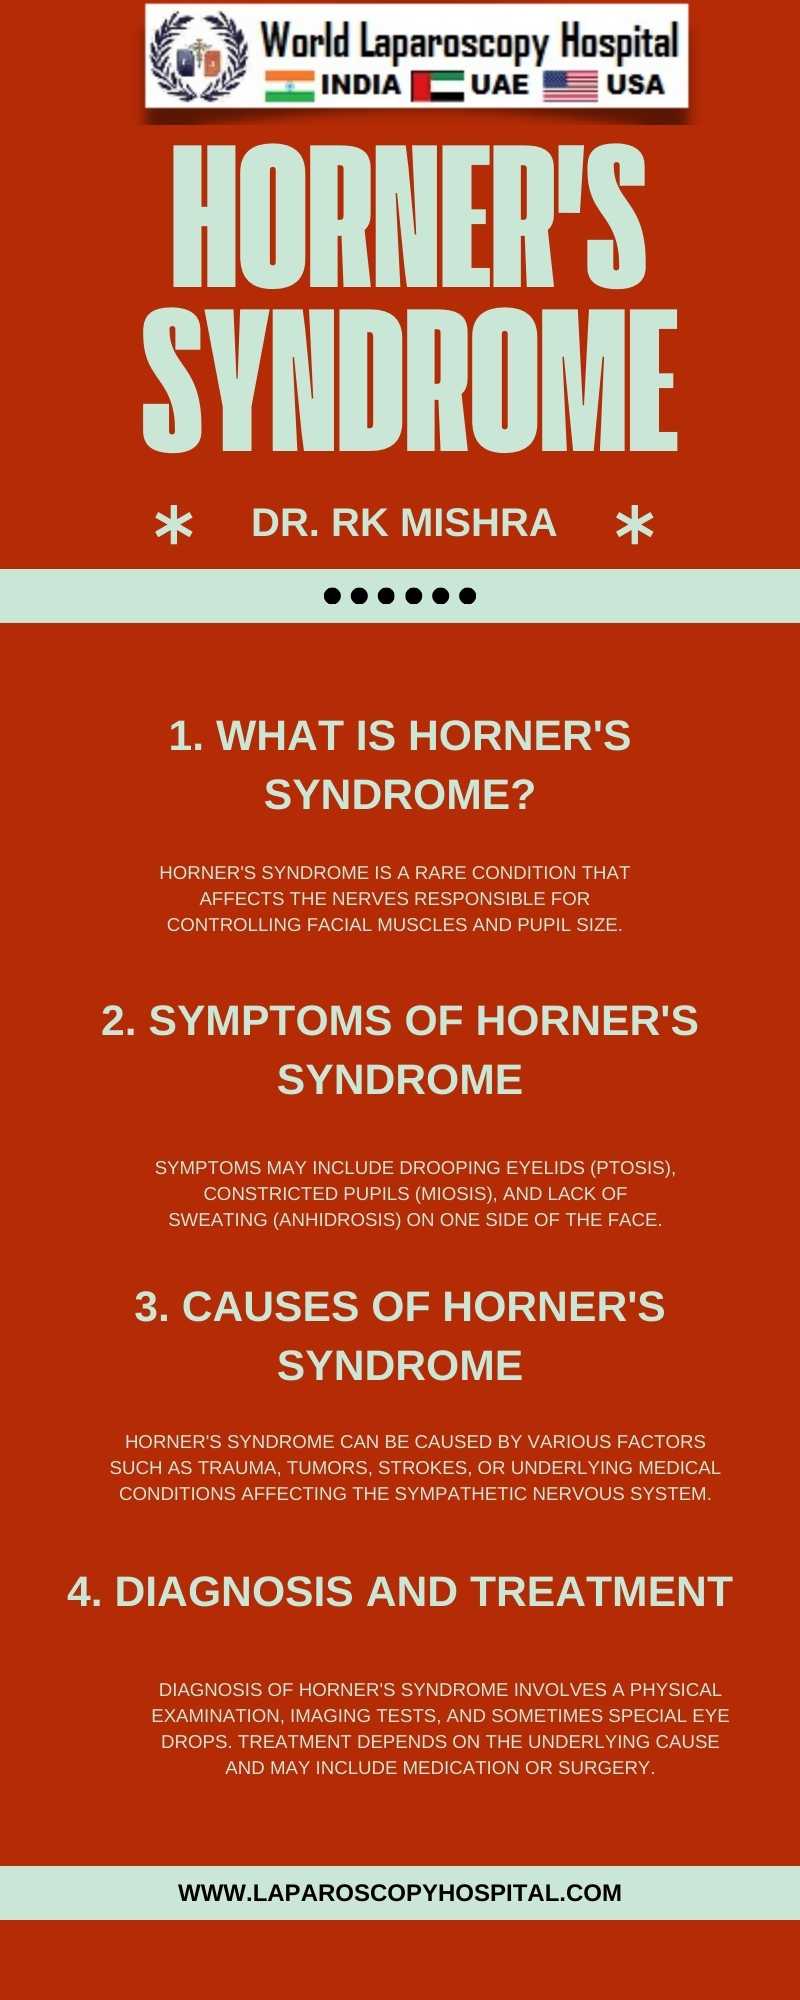 Horner's Syndrome: Symptoms, Causes, and Management in the Context of Thoracic and Neck Surgeries